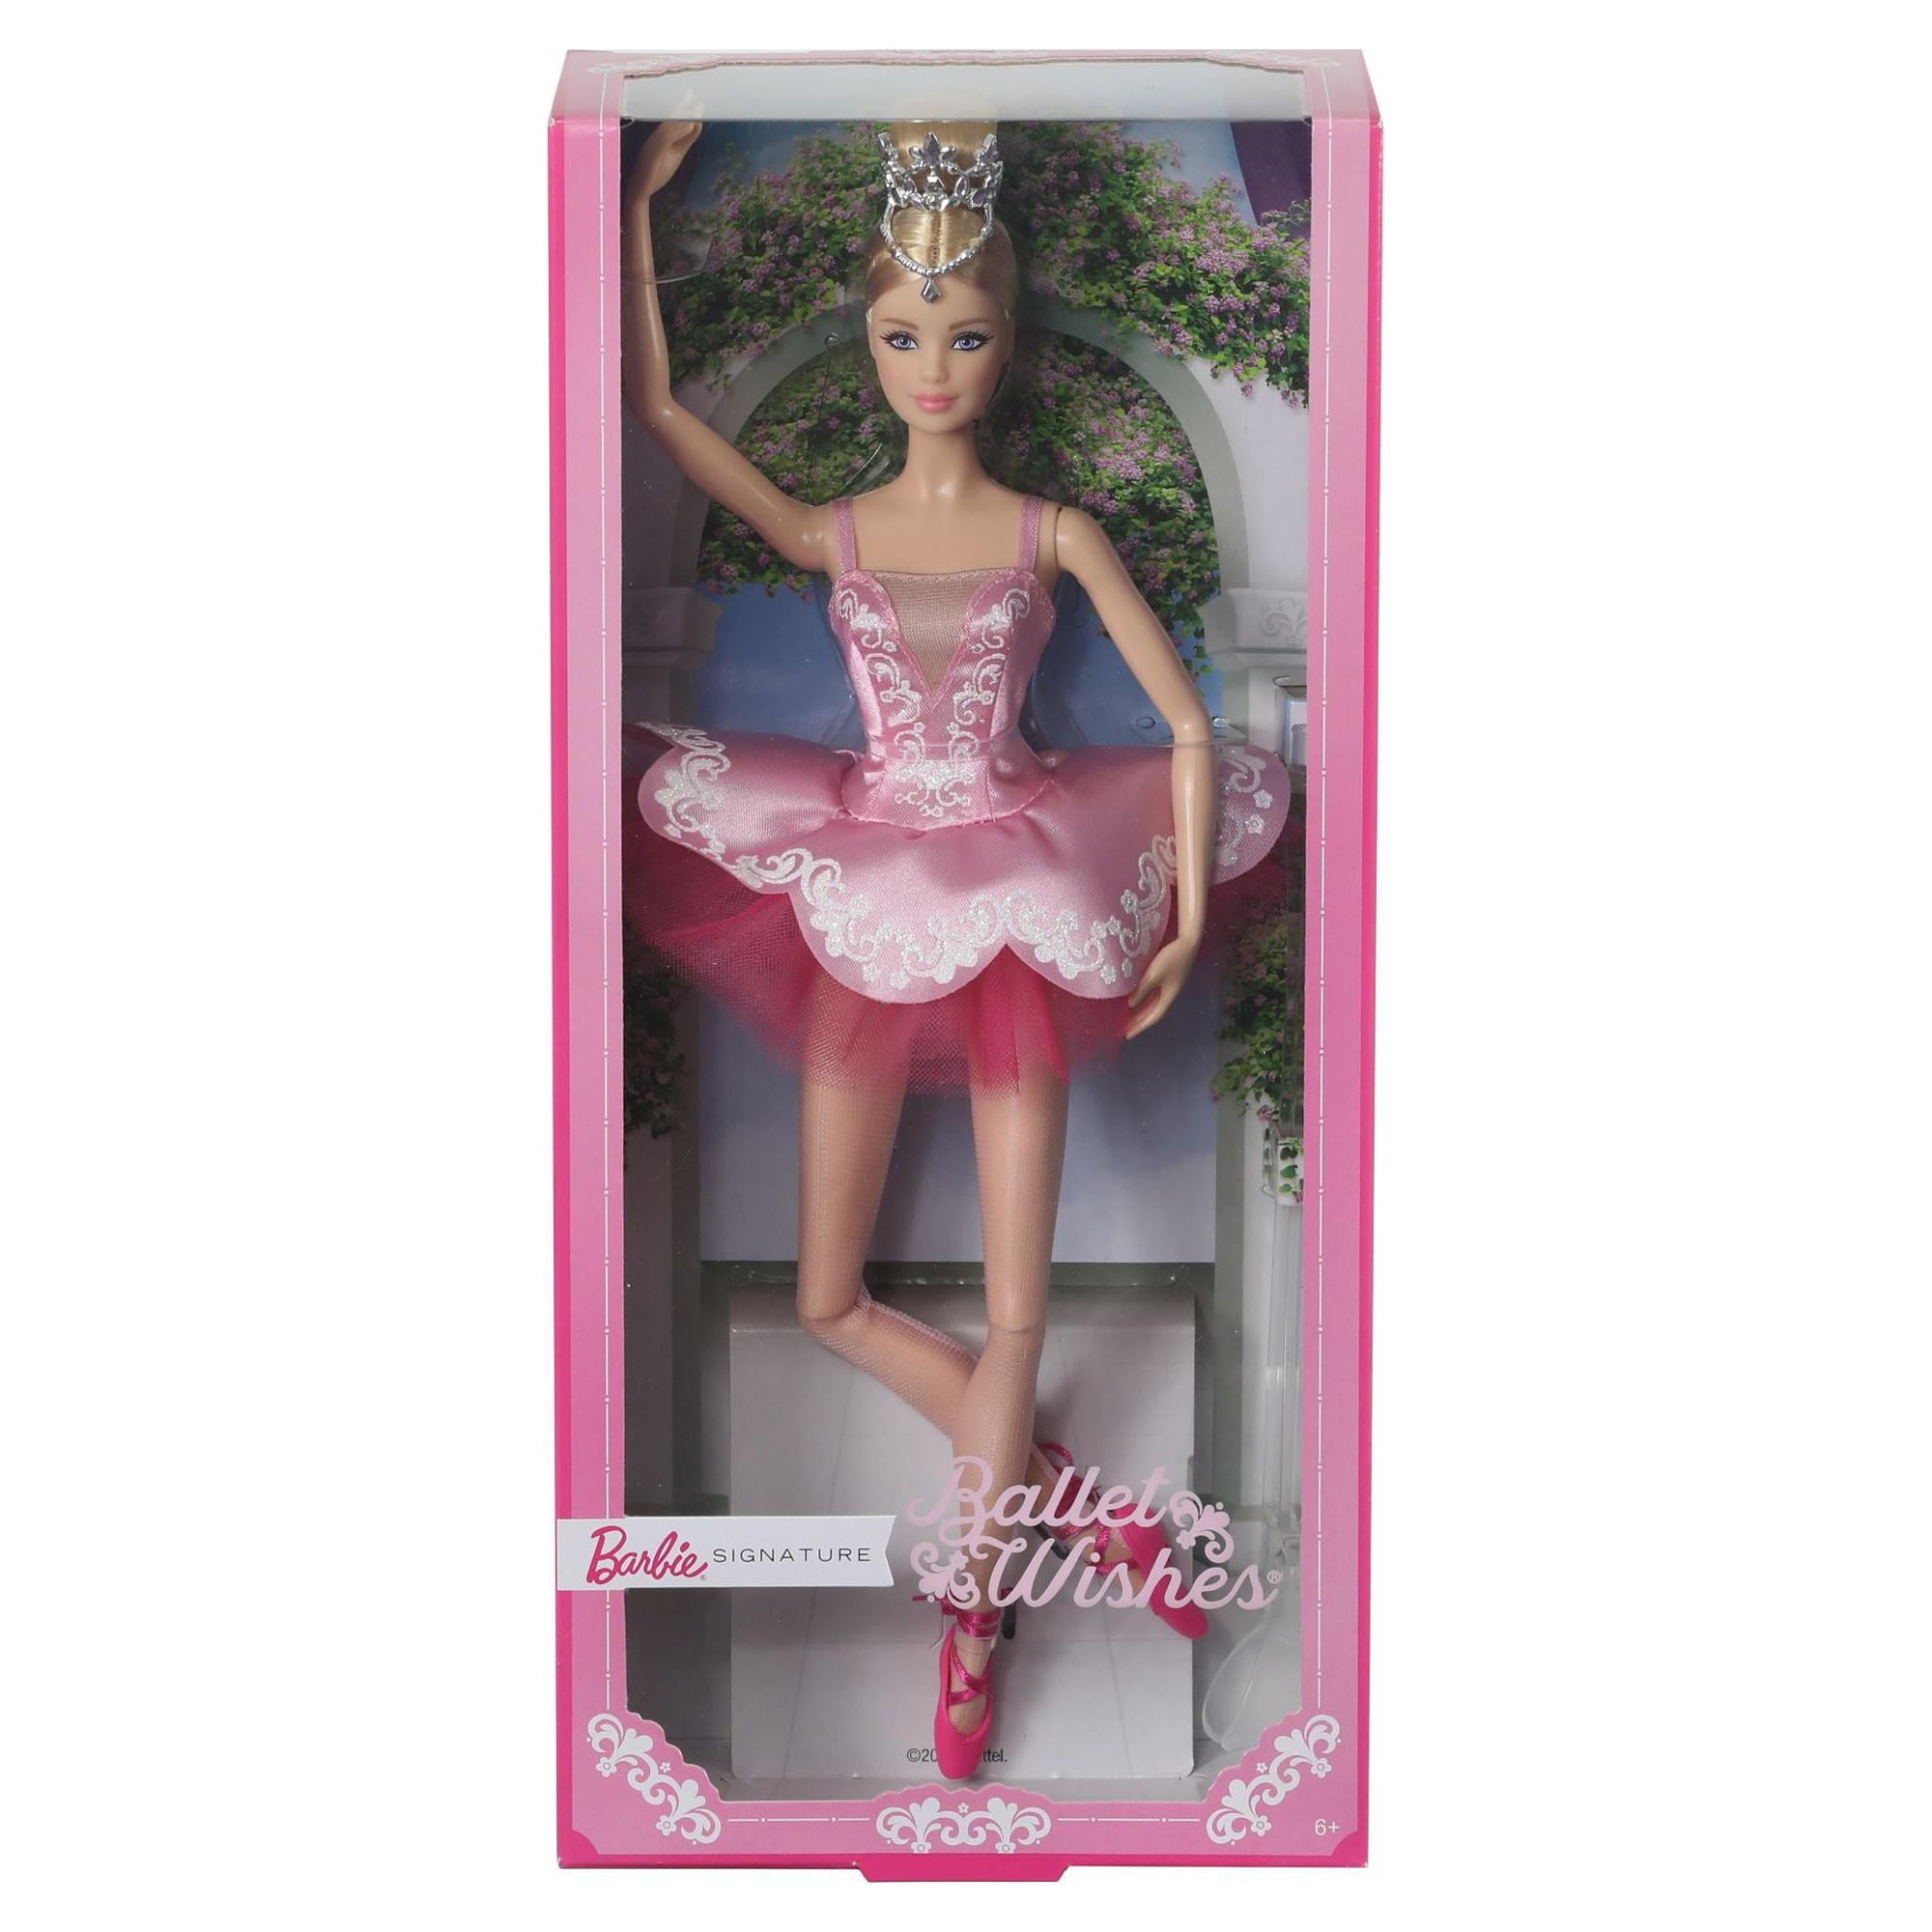 Olds Wearing Tutu, And Up Shoes Approx. Tiara, And Wishes 6 12-In Doll, Barbie Signature Pointe Ballet Year for